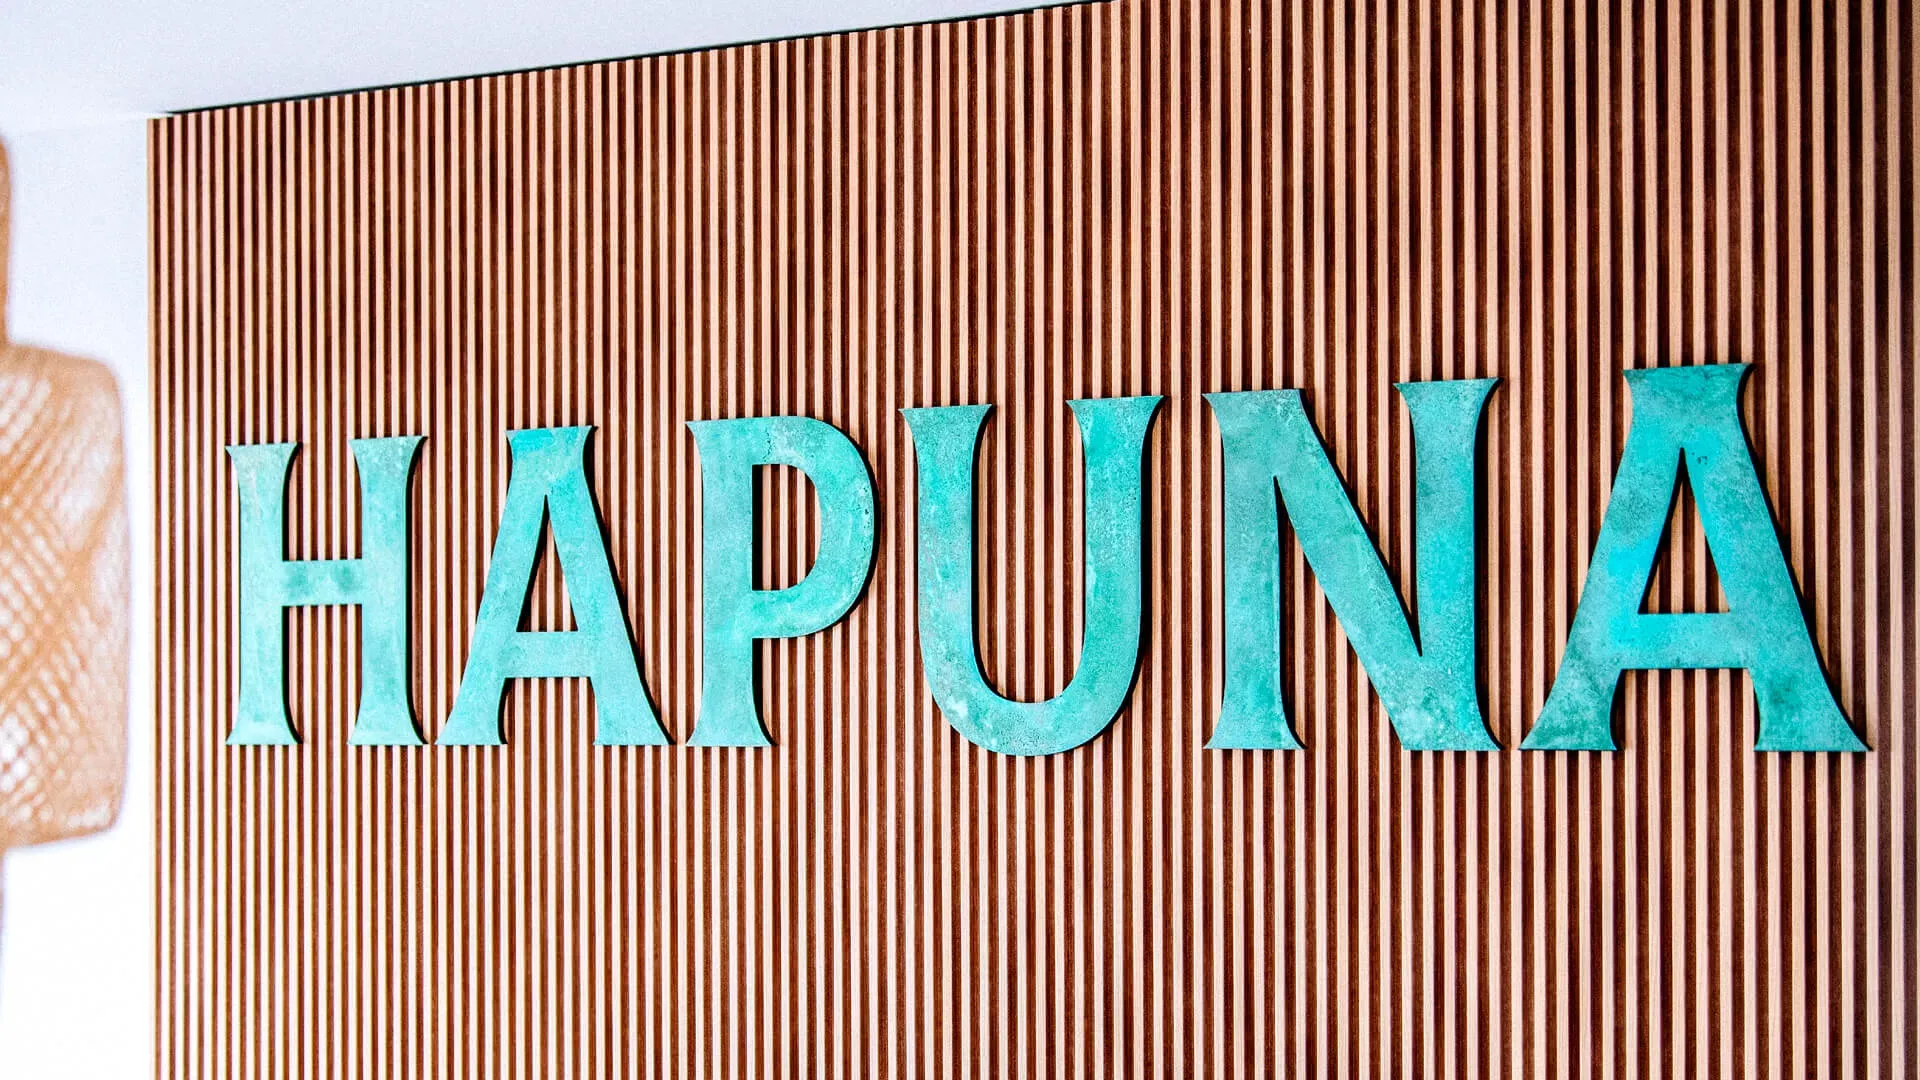 Hapuna - word made of metal in industrial style covered with patina